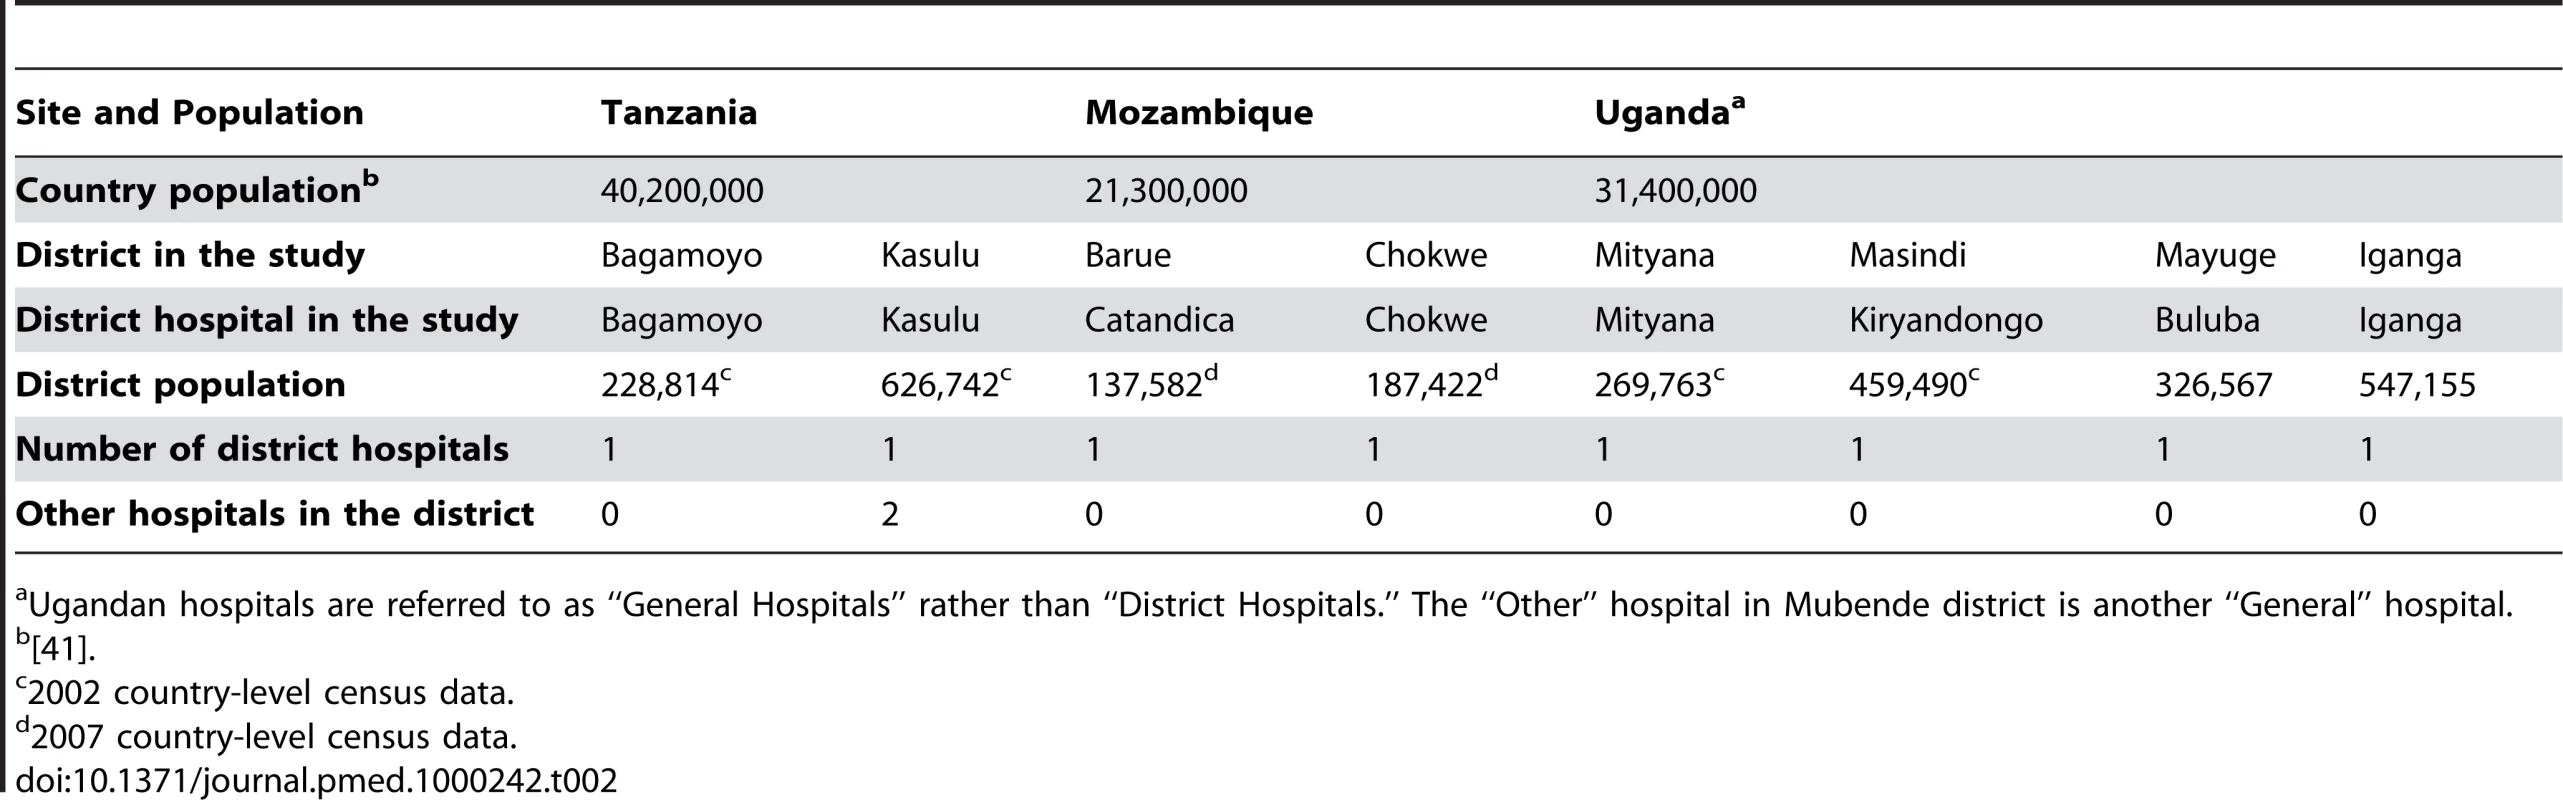 Distribution of health care facilities by study site and population served.